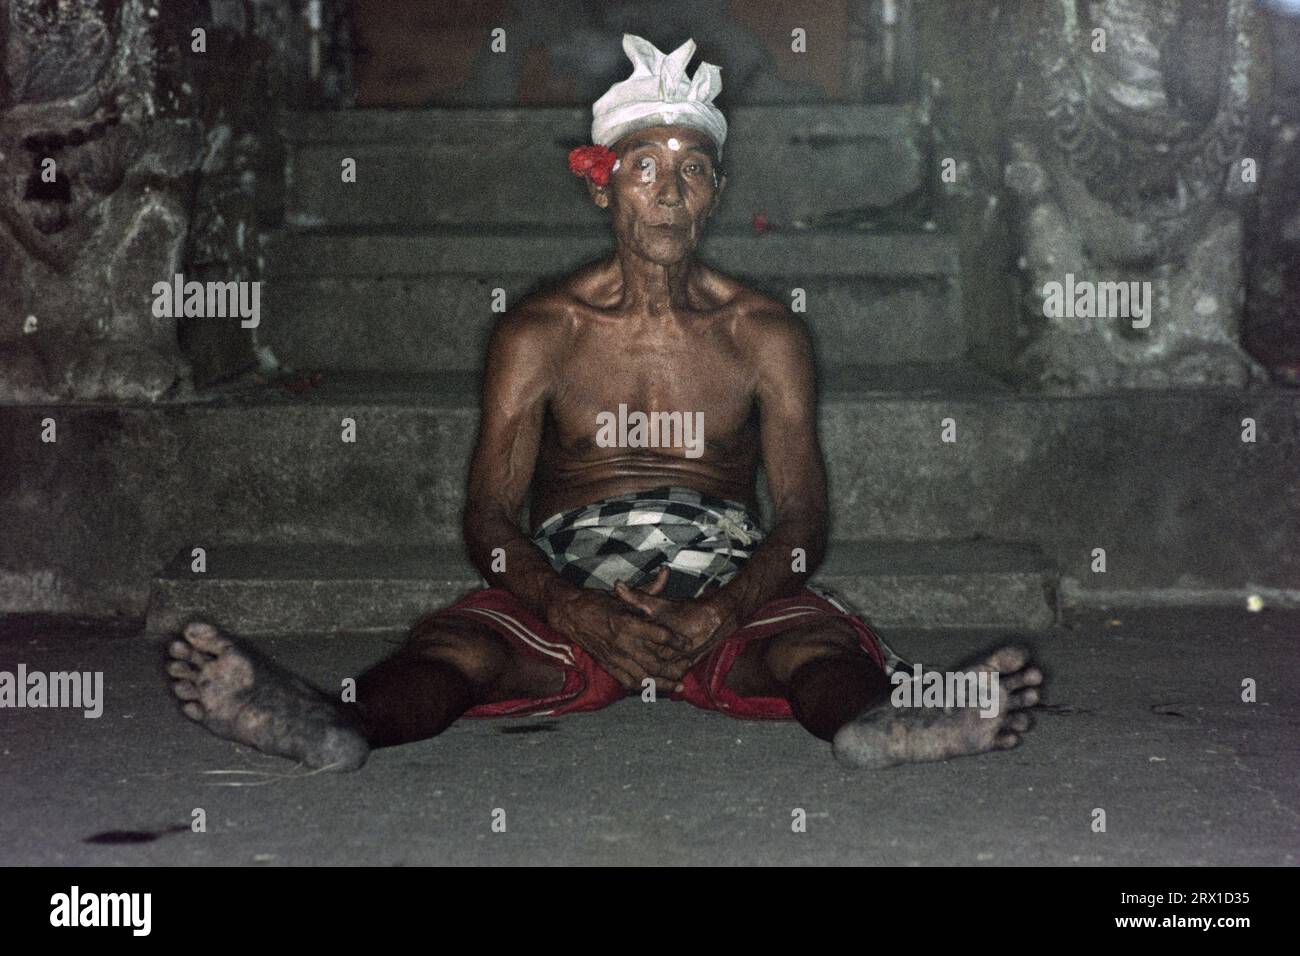 Portrait of elderly Balinese man exhausted after fire ceremony Stock Photo